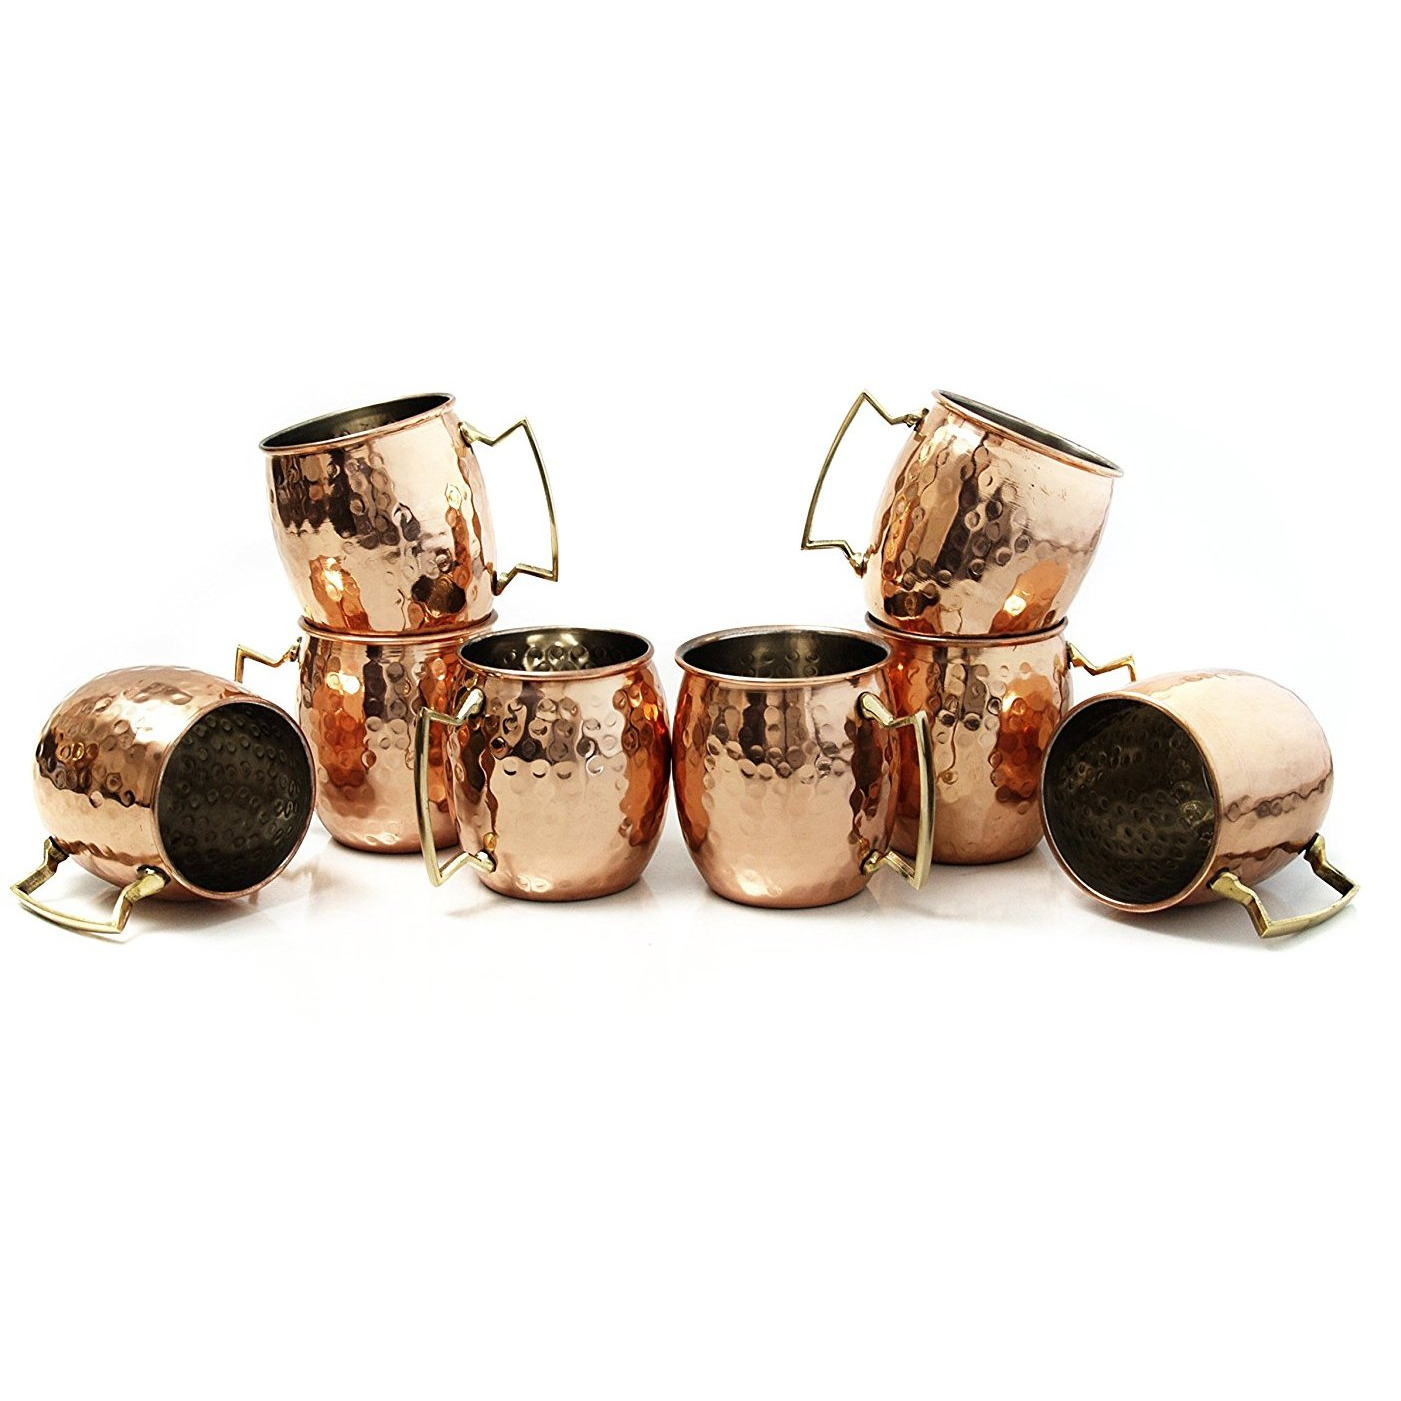 Winmaarc Hammered Moscow Mule Copper Drinking Mug 18 Ounce Set of 8